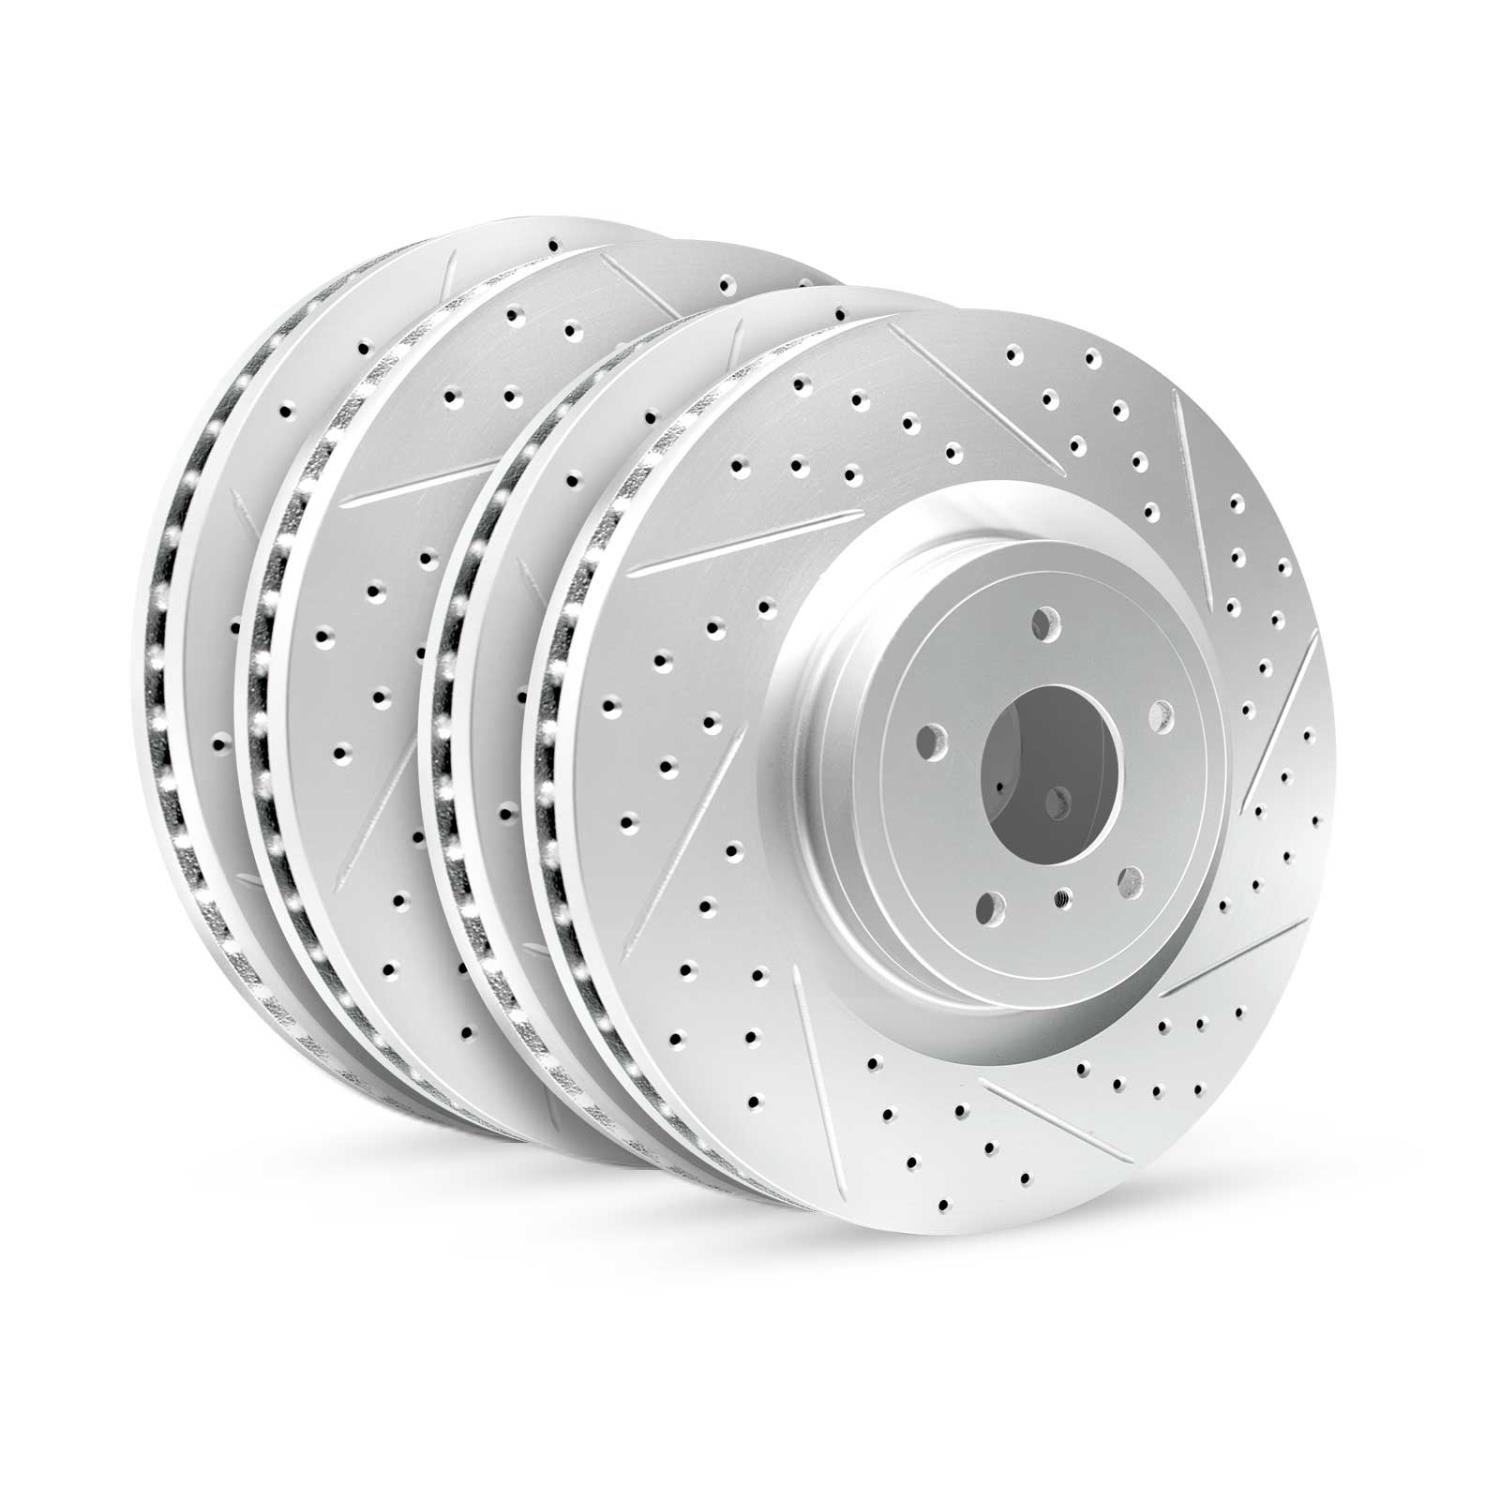 GEO-Carbon Drilled/Slotted Rotors, Fits Select Kia/Hyundai/Genesis, Position: Front/Rear